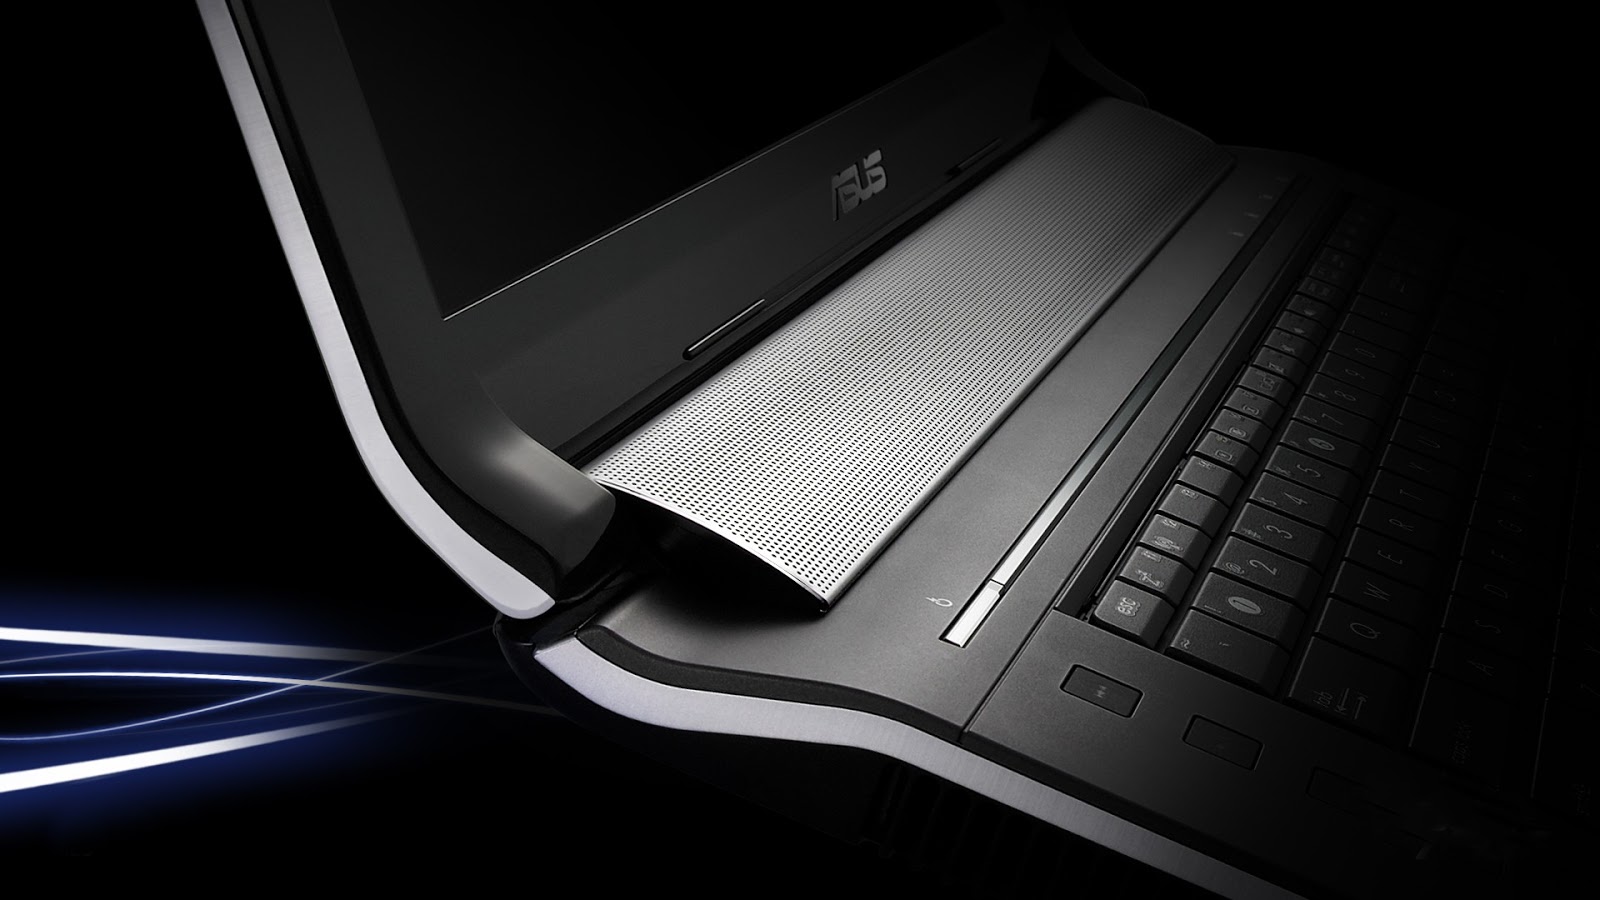  HD  Laptop  3D  Wallpapers  Stylish Cover